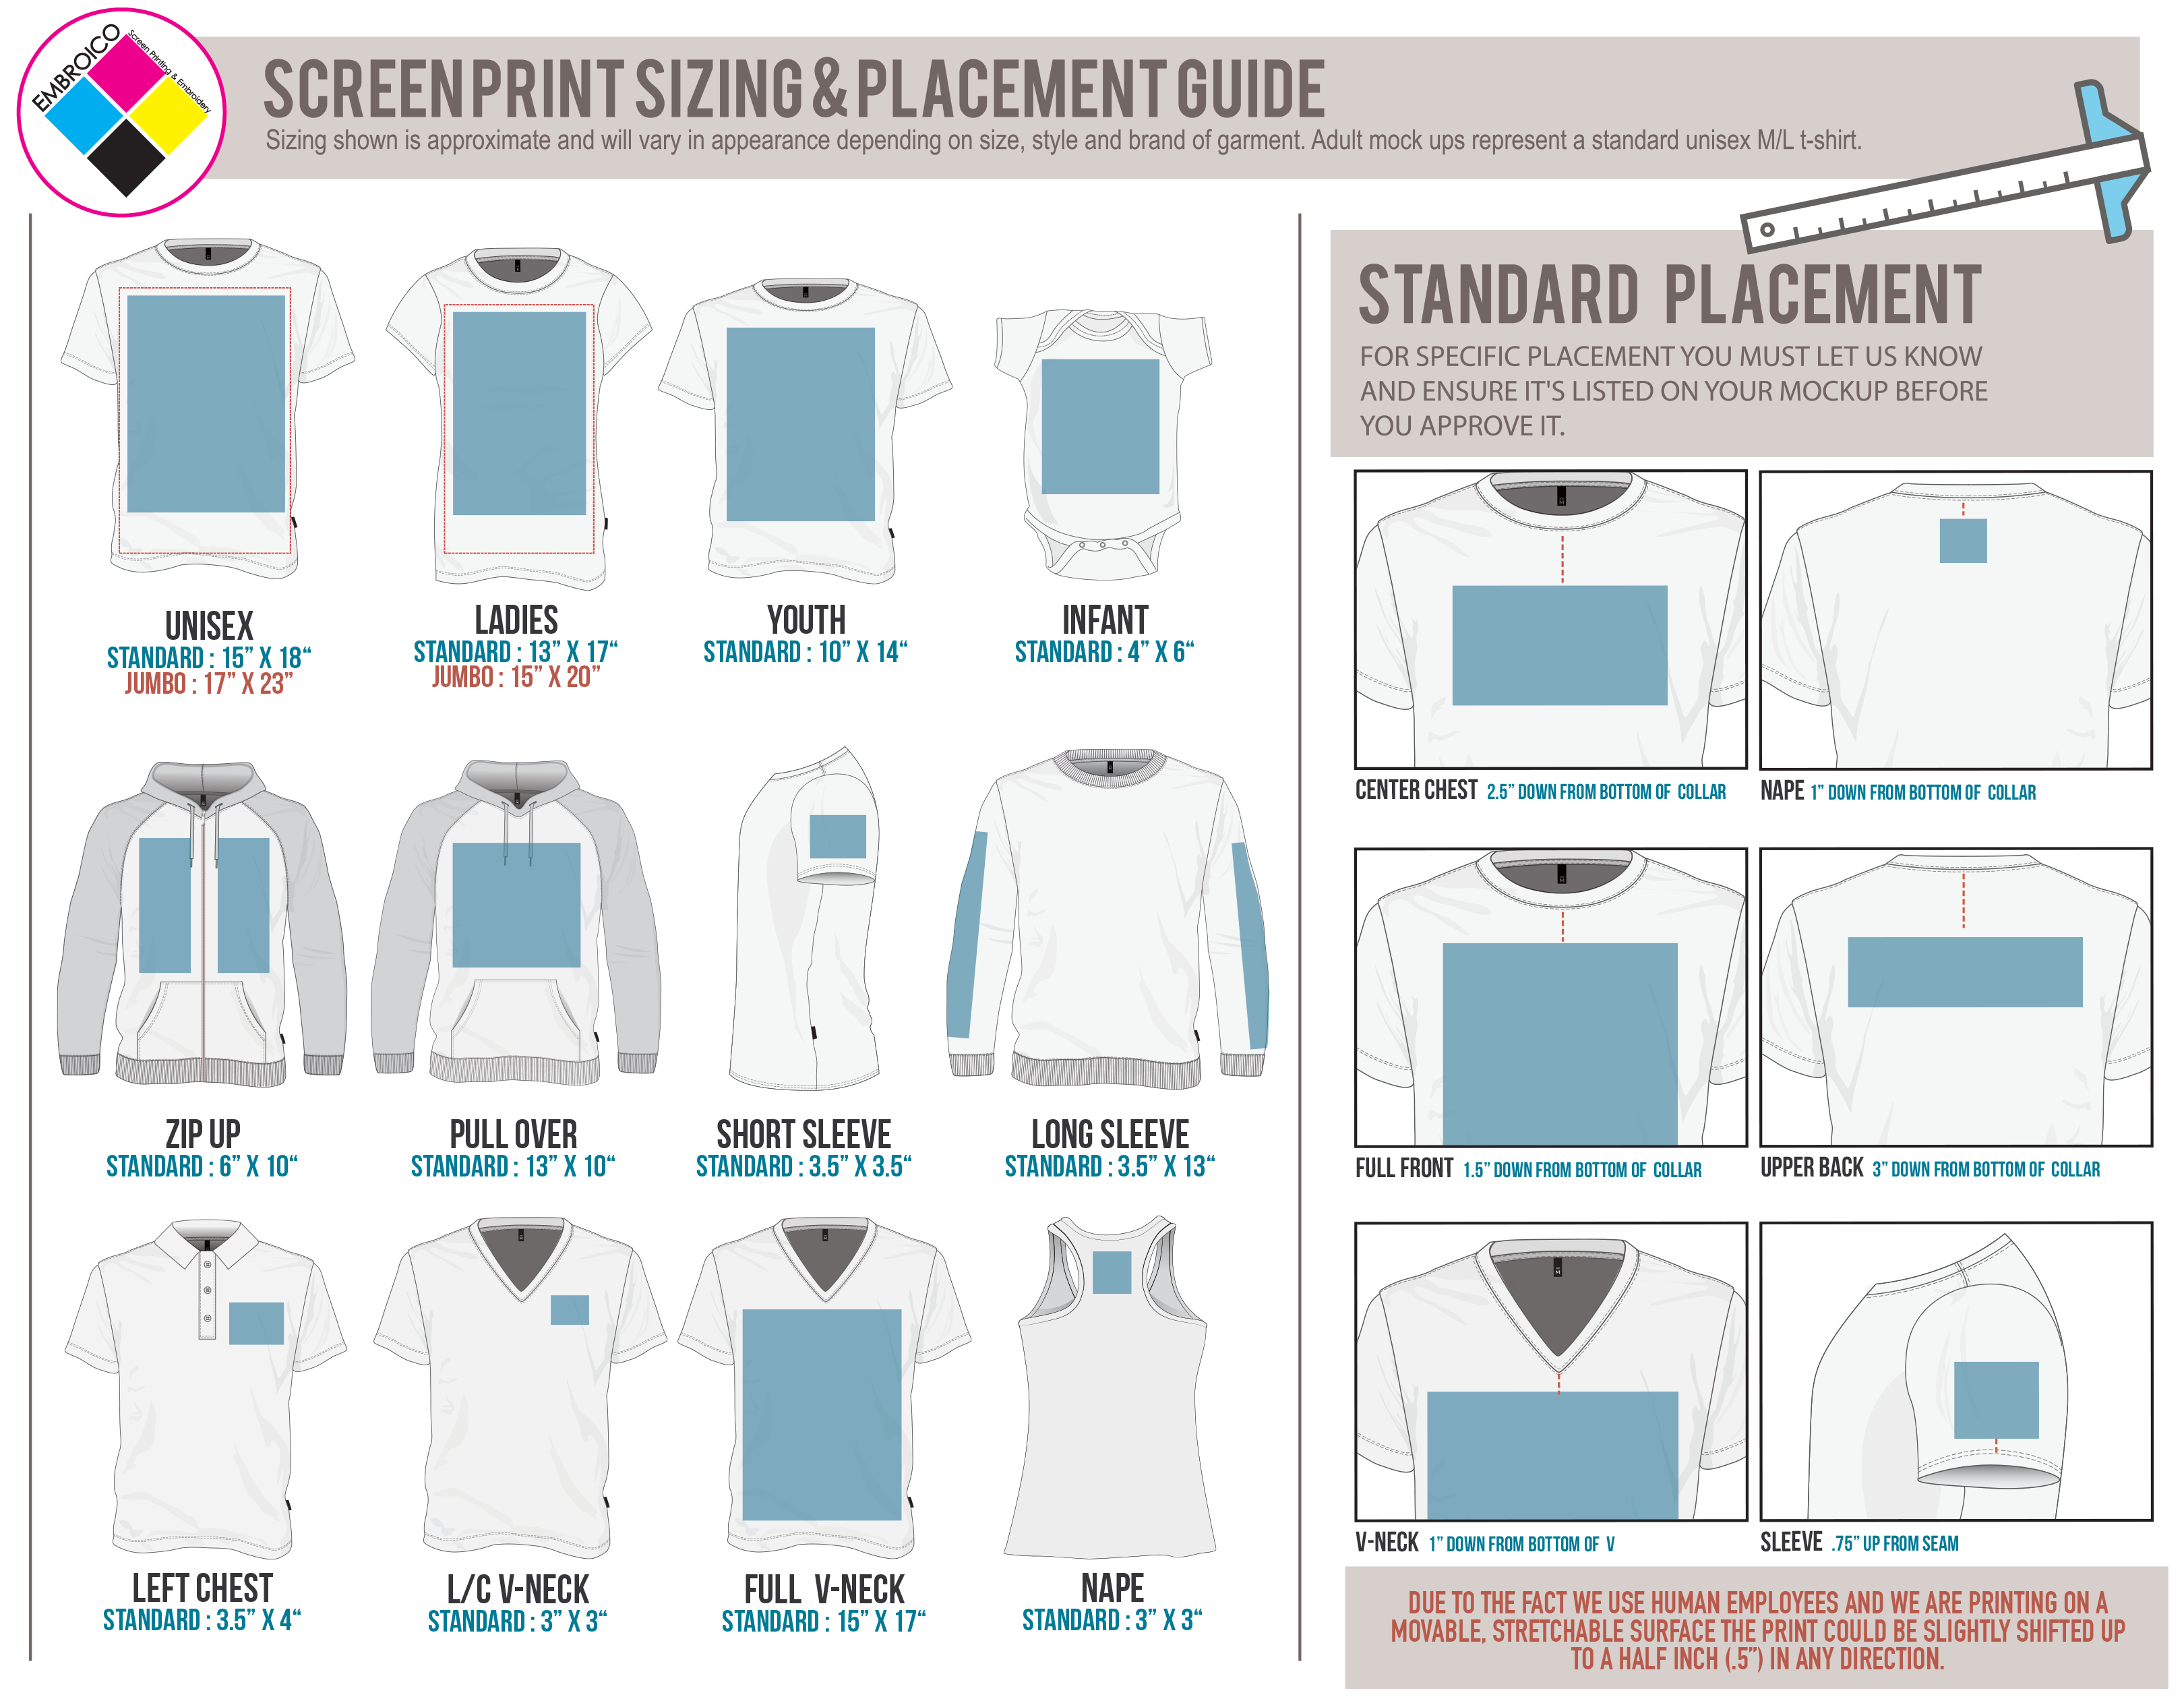 size-and-placement-guide | Embroico, Inc.